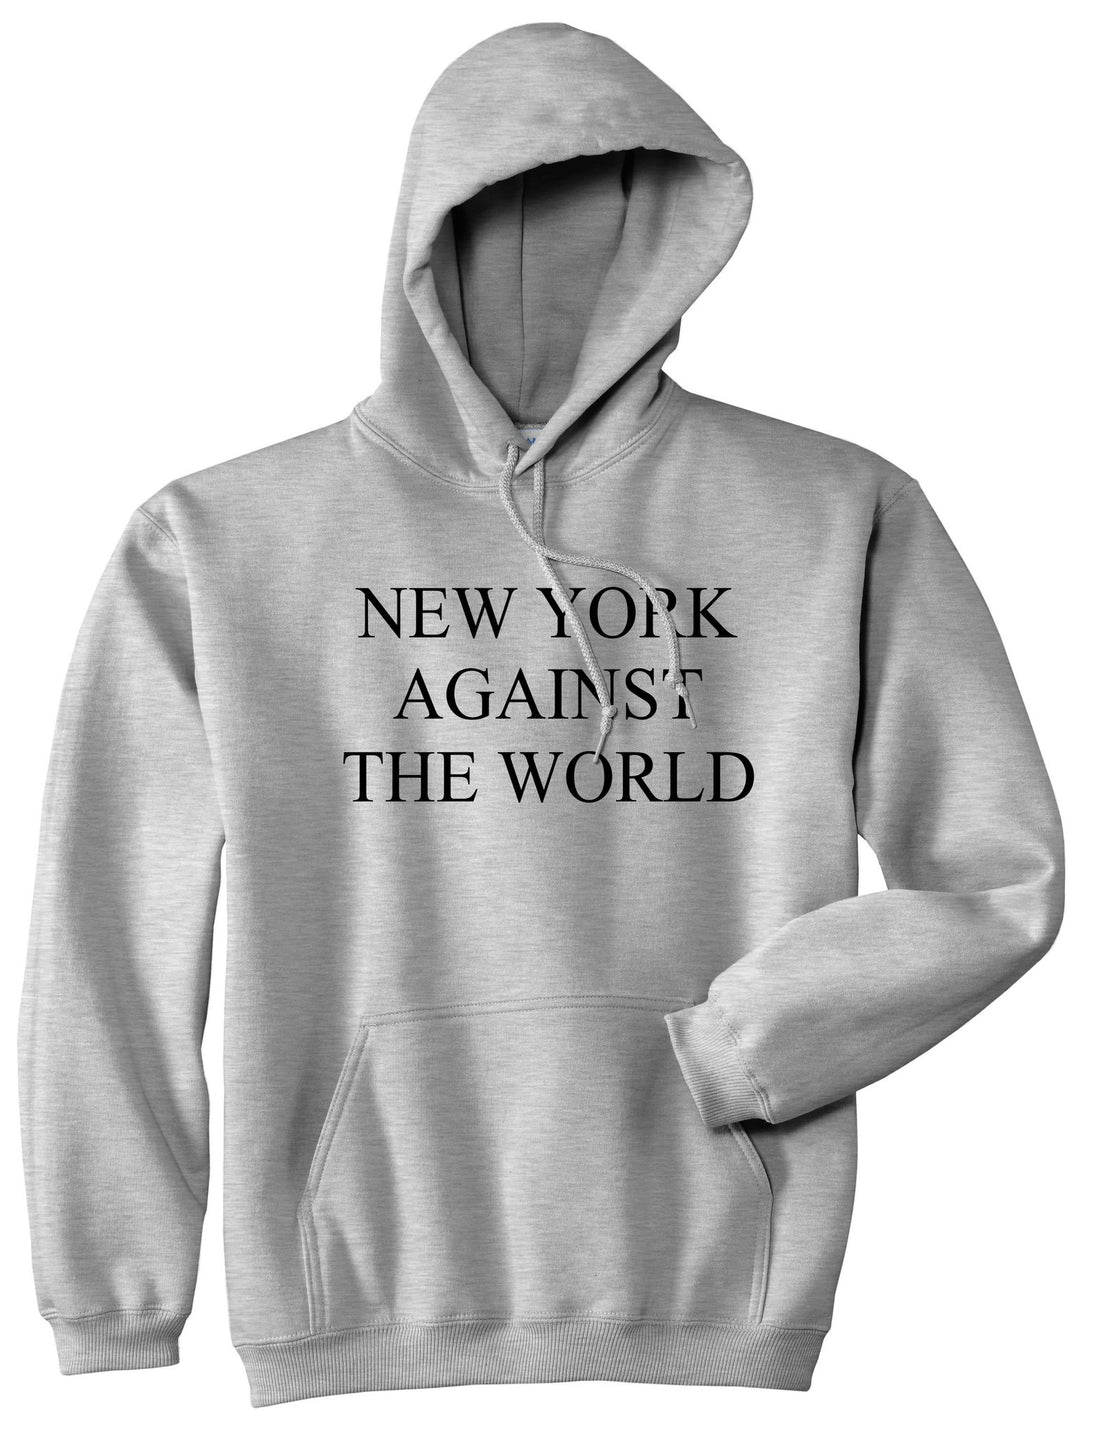 New York Against The World Pullover Hoodie Hoody in Grey by Kings Of NY